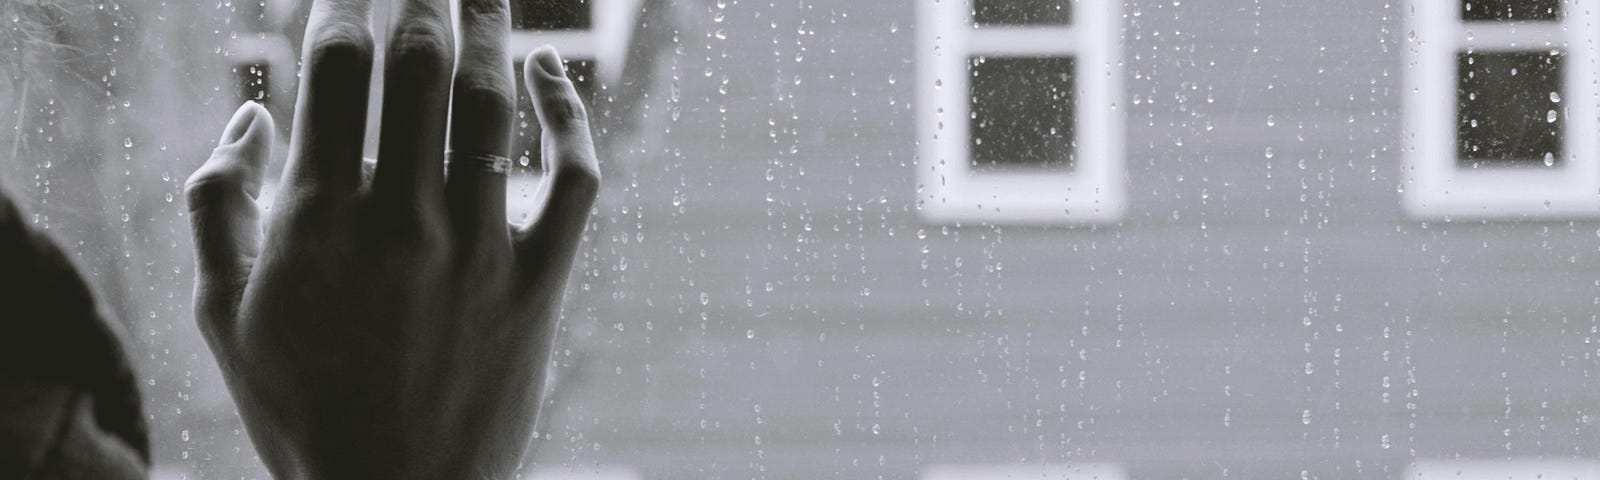 A person in front of a window, pressing their hand against the window pane as rain splatters on the glass.